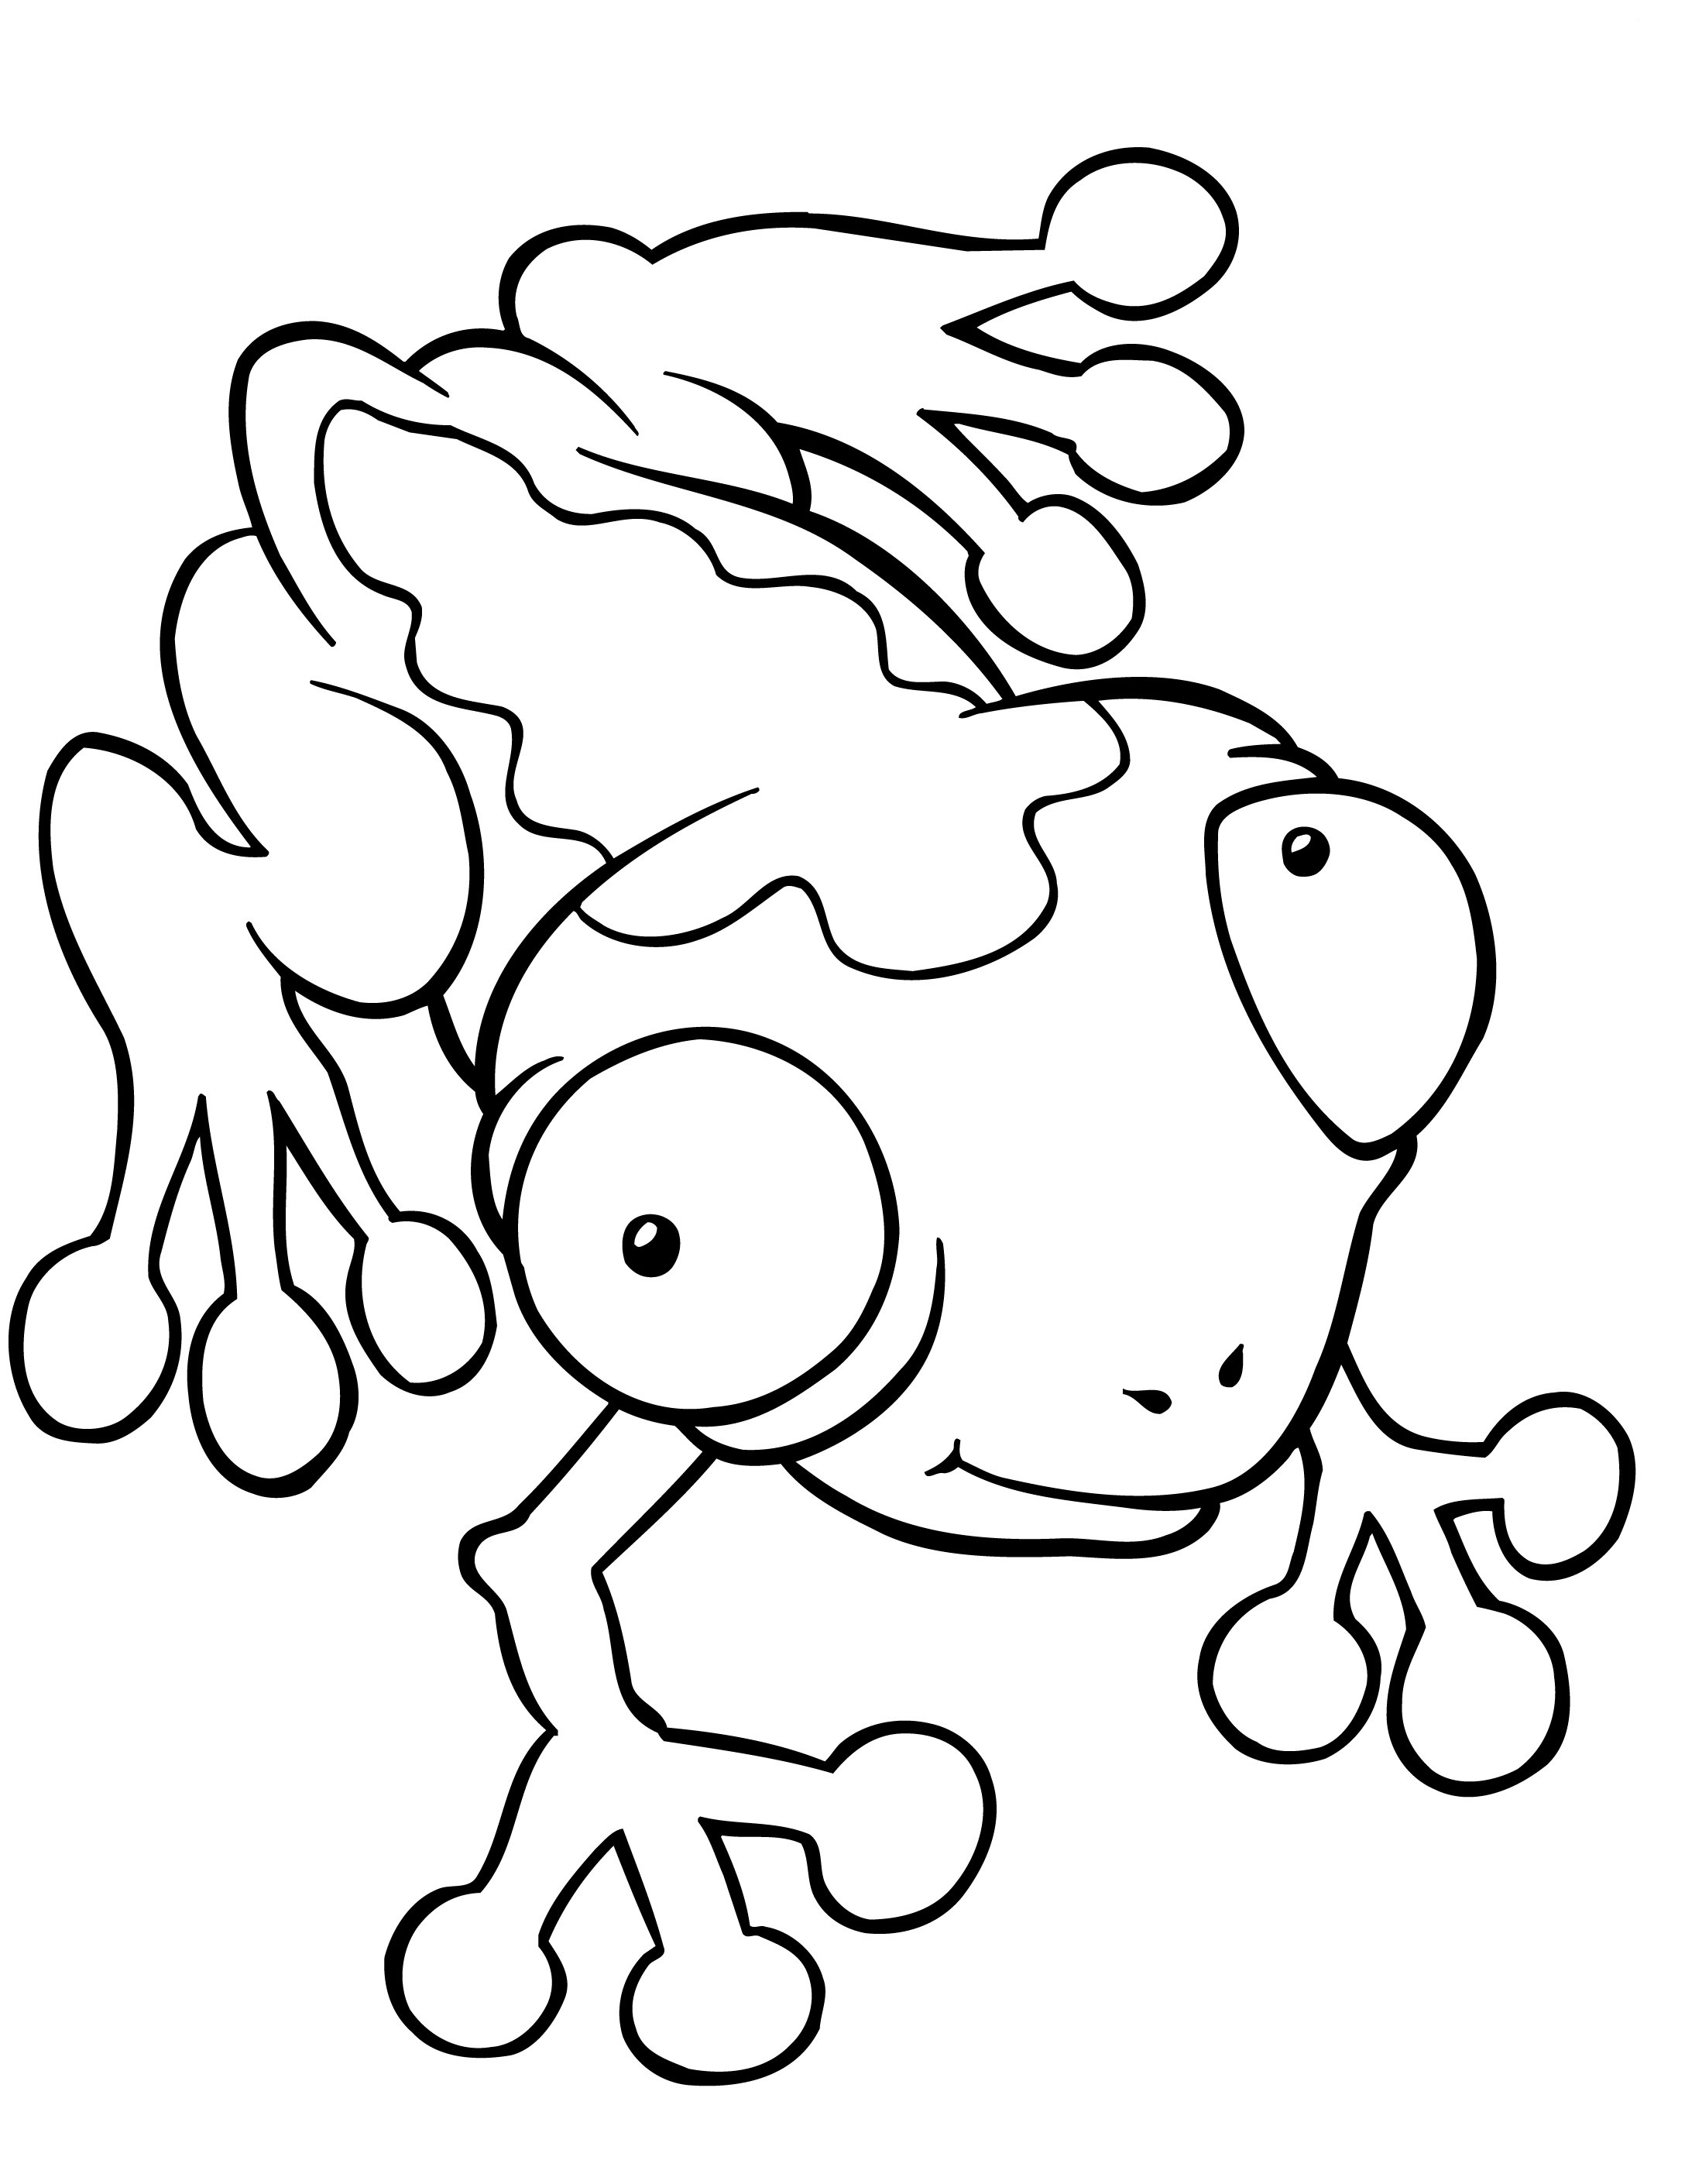 Coloring Pages Of Frogs 4